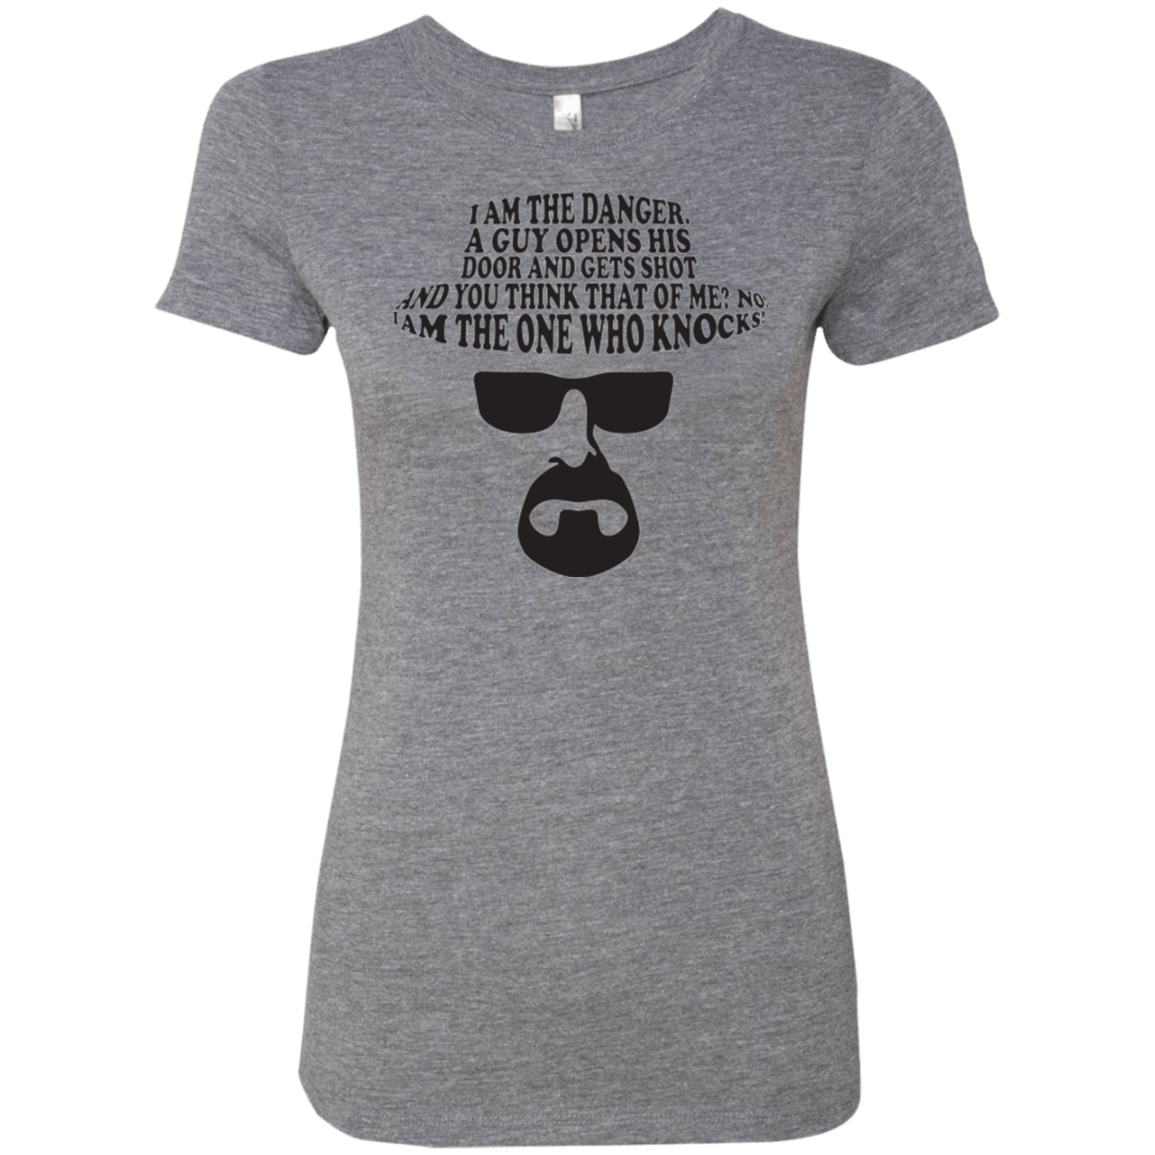 T-Shirts Premium Heather / Small The One Who Knocks Women's Triblend T-Shirt